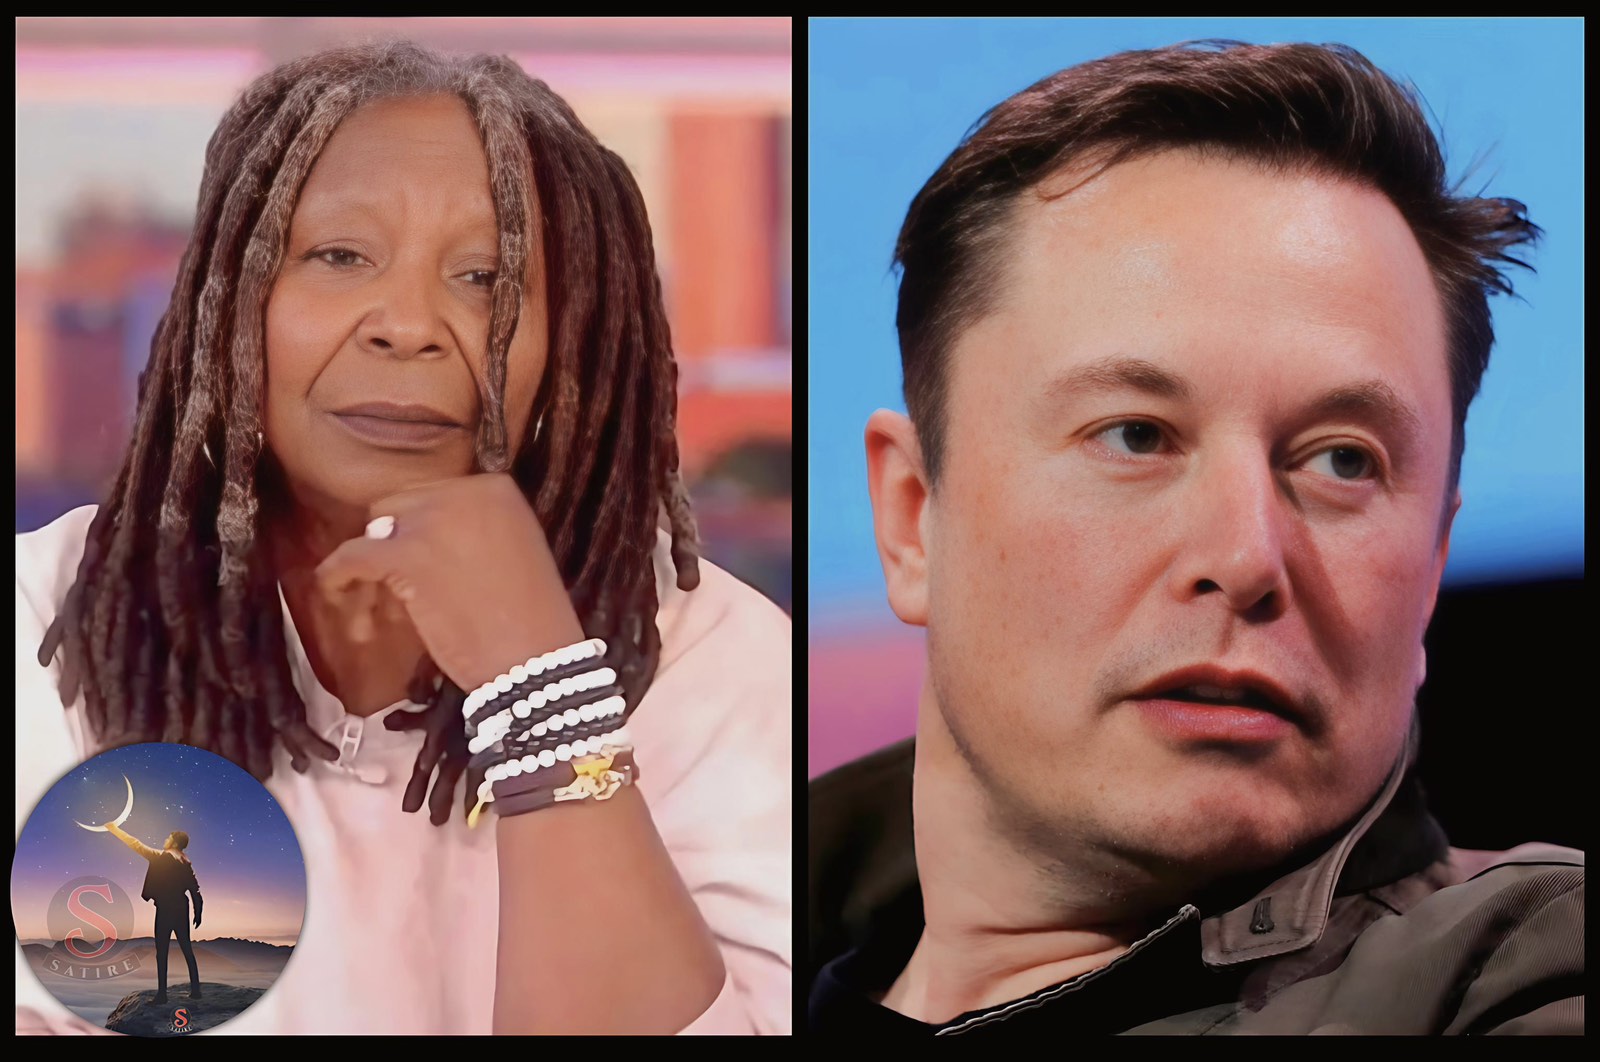 Elon Musk sues Whoopi Goldberg and ‘The View’ for $80 million, alleging defamation.